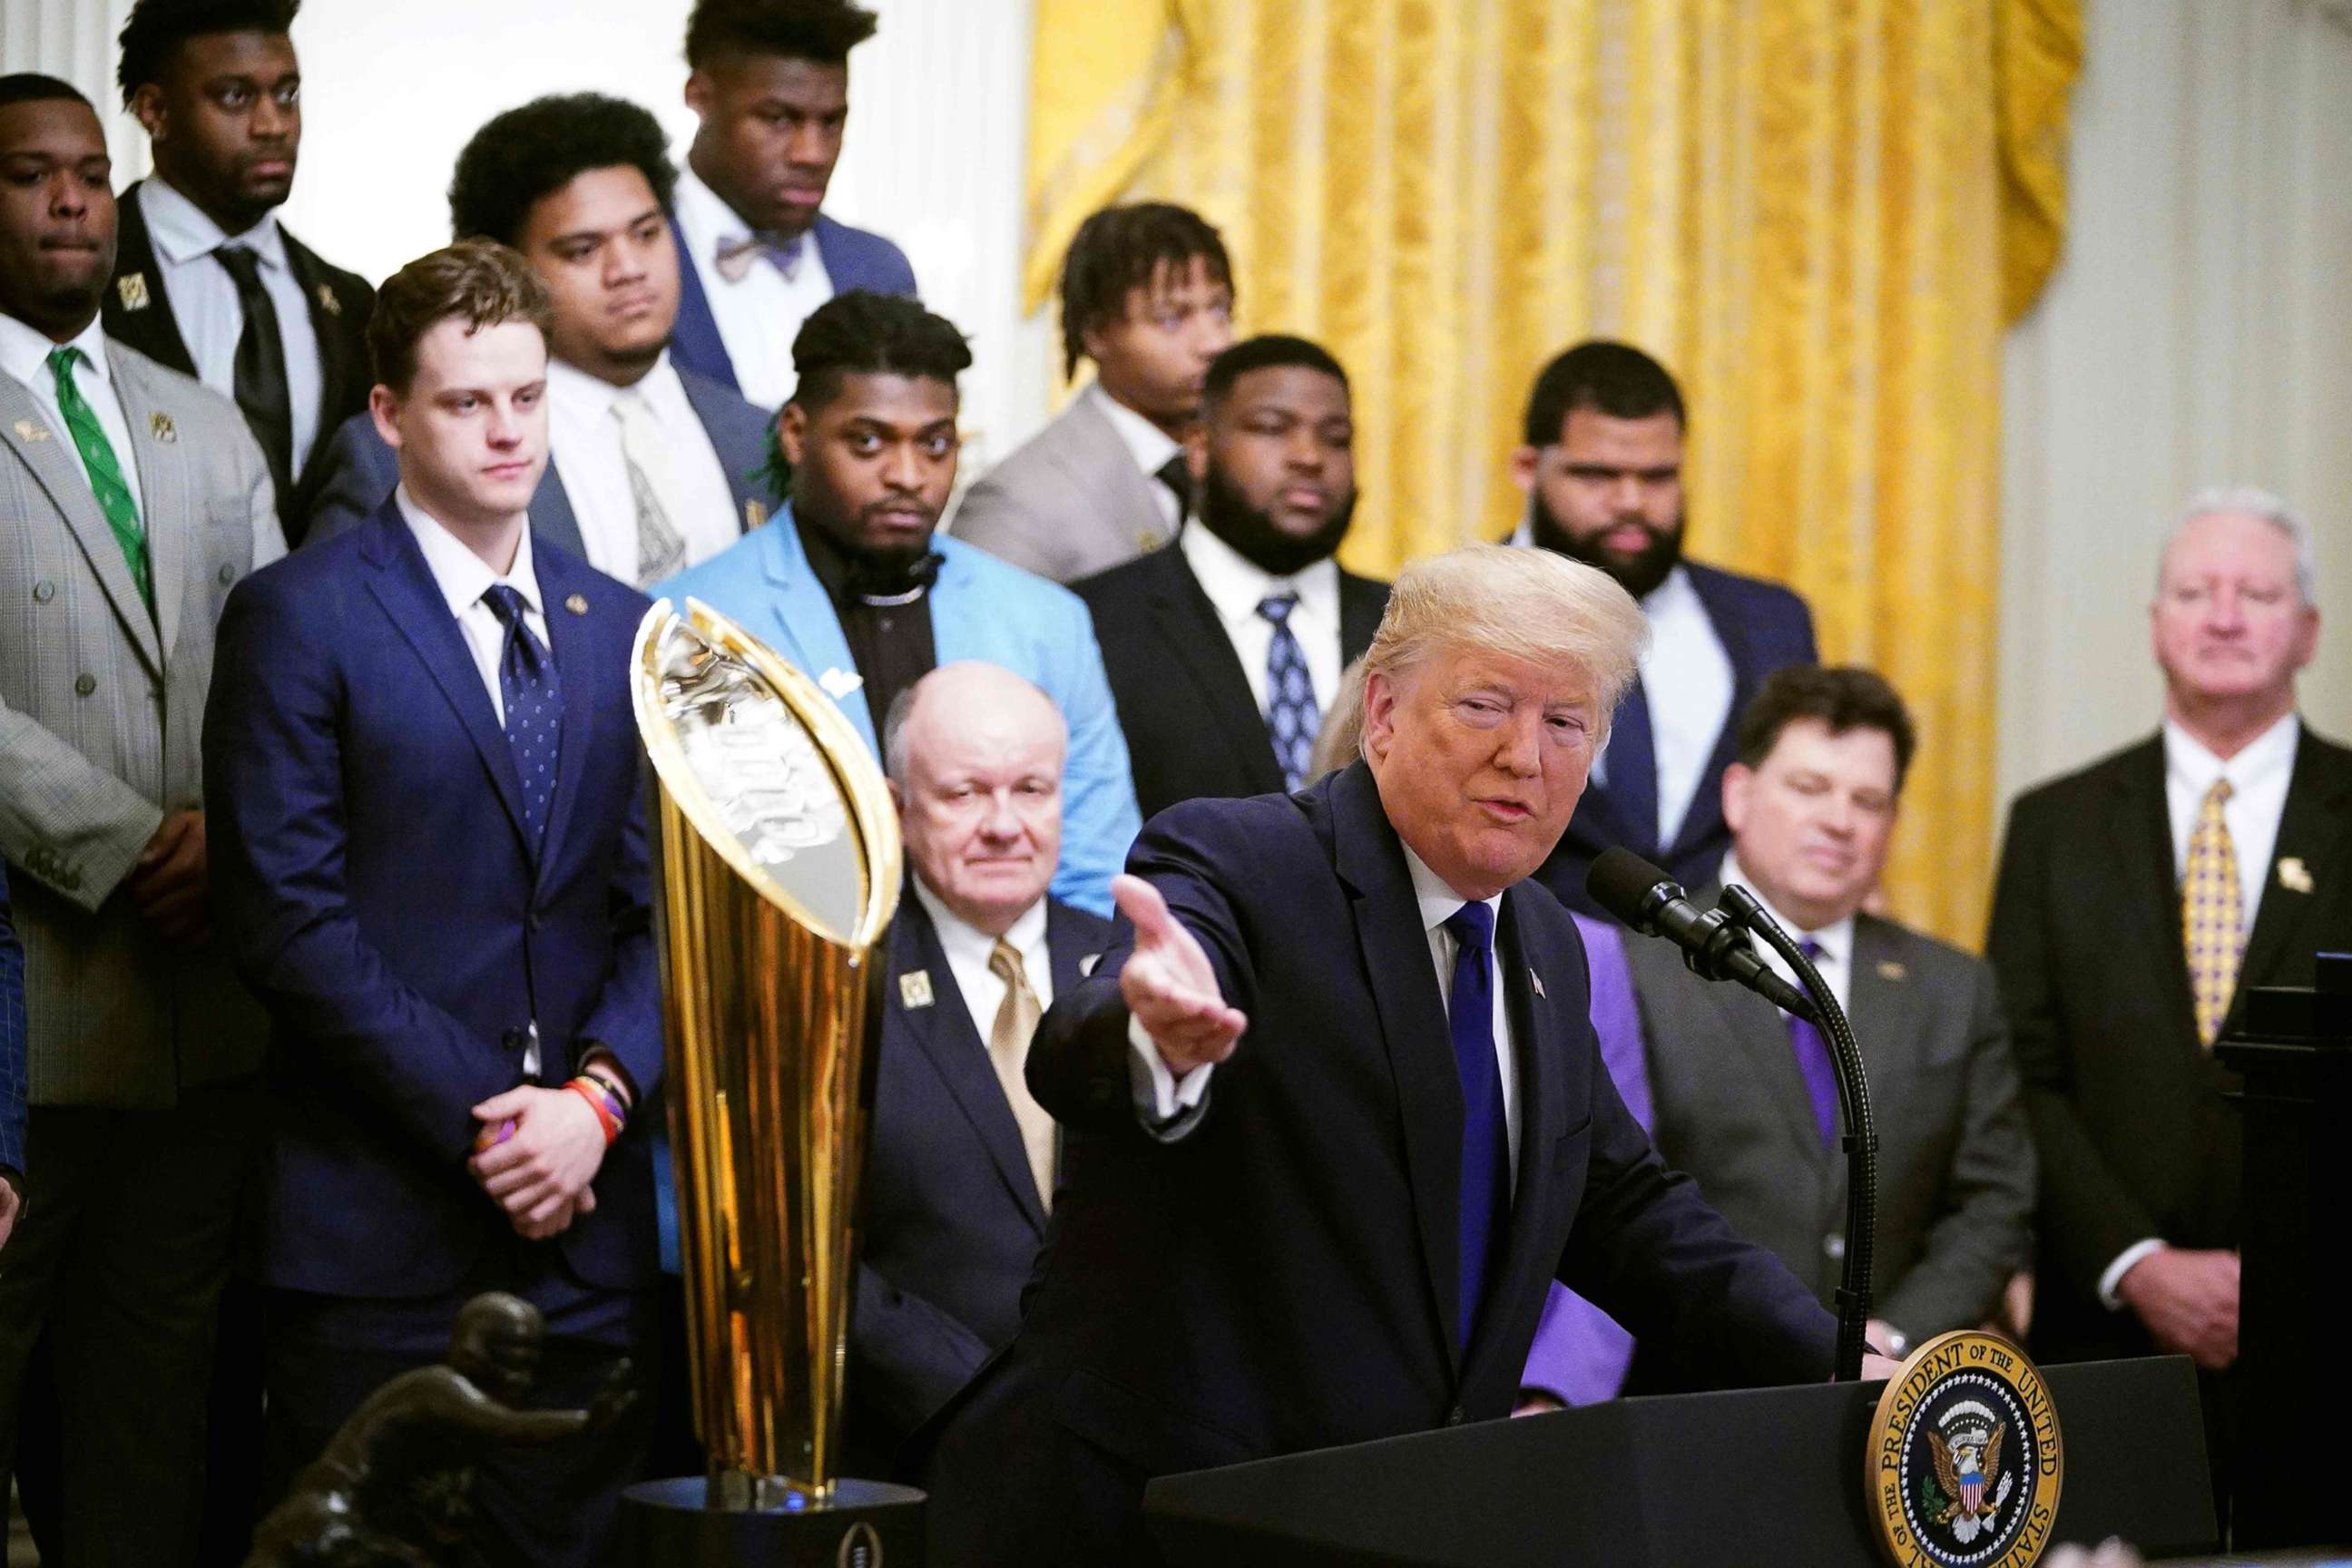 PHOTO: President Donald Trump takes part in an event honoring the 2019 College Football National Champions, the Louisiana State University Tigers, in the East Room of the White House in Washington, Jan. 17, 2020.